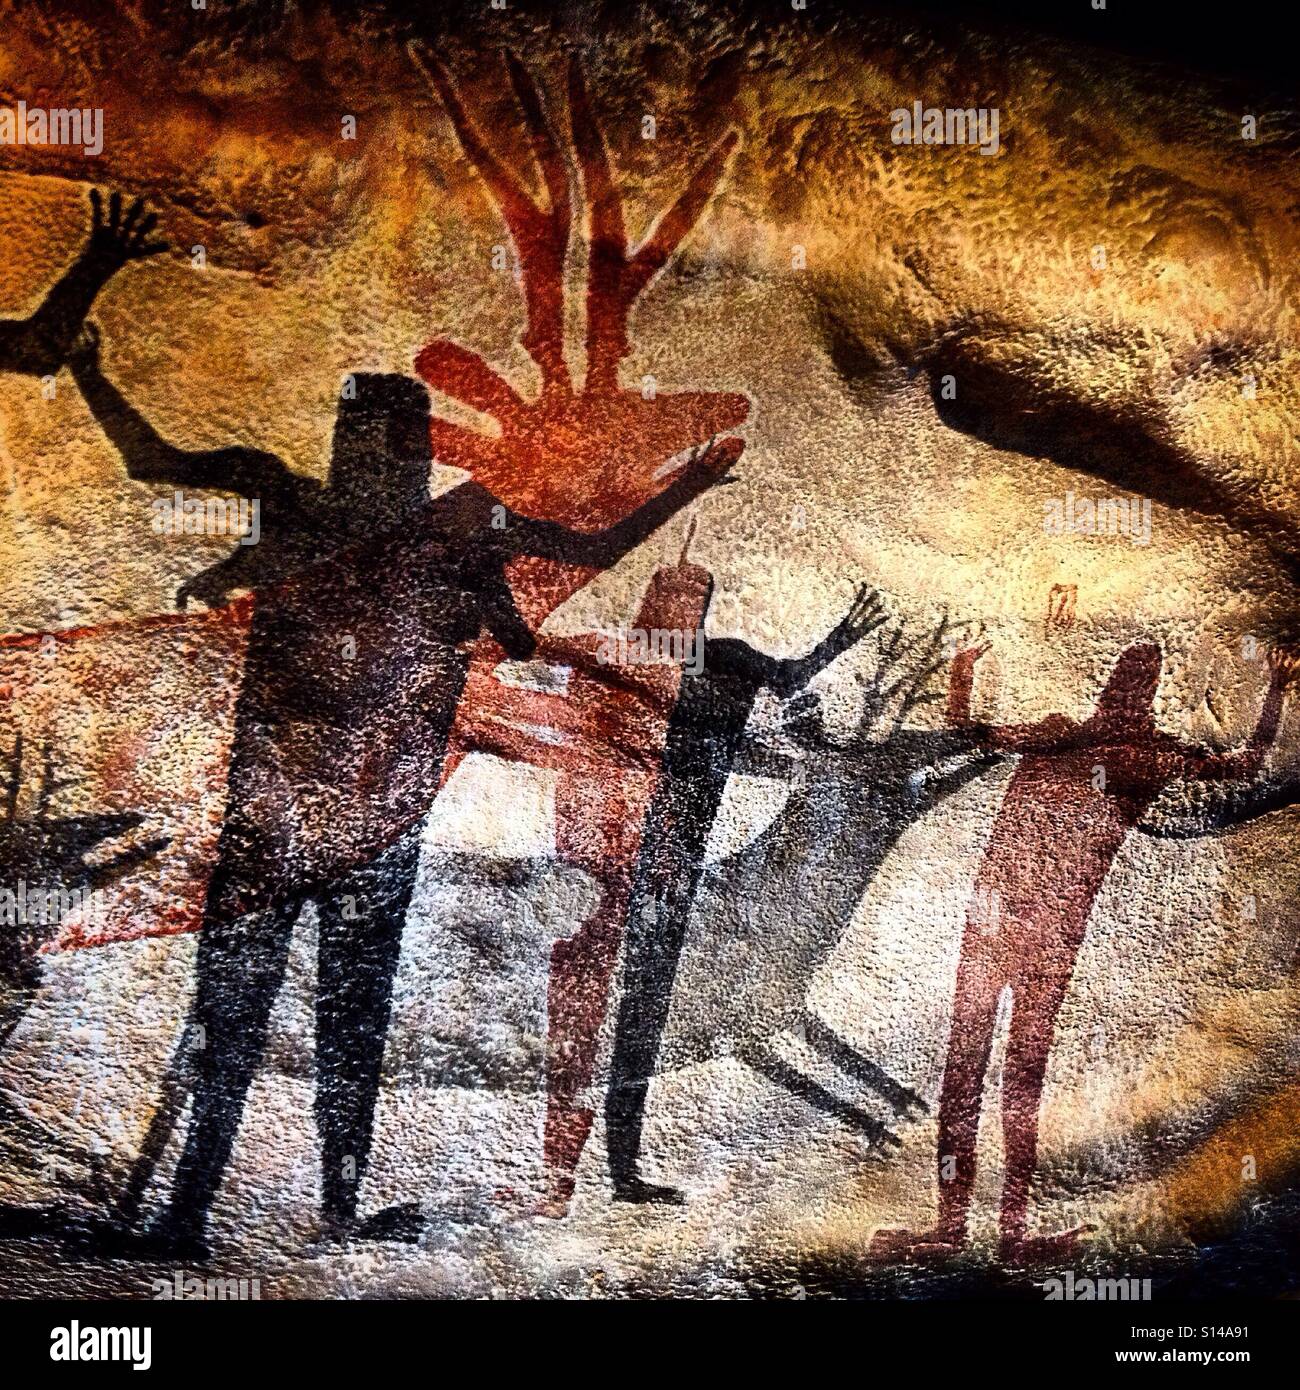 A reproduction of the indigenous mural painted in Sierra de San Francisco caves in Baja California, Mexico City, Mexico, showing deer and red and black man with squared heads. Stock Photo